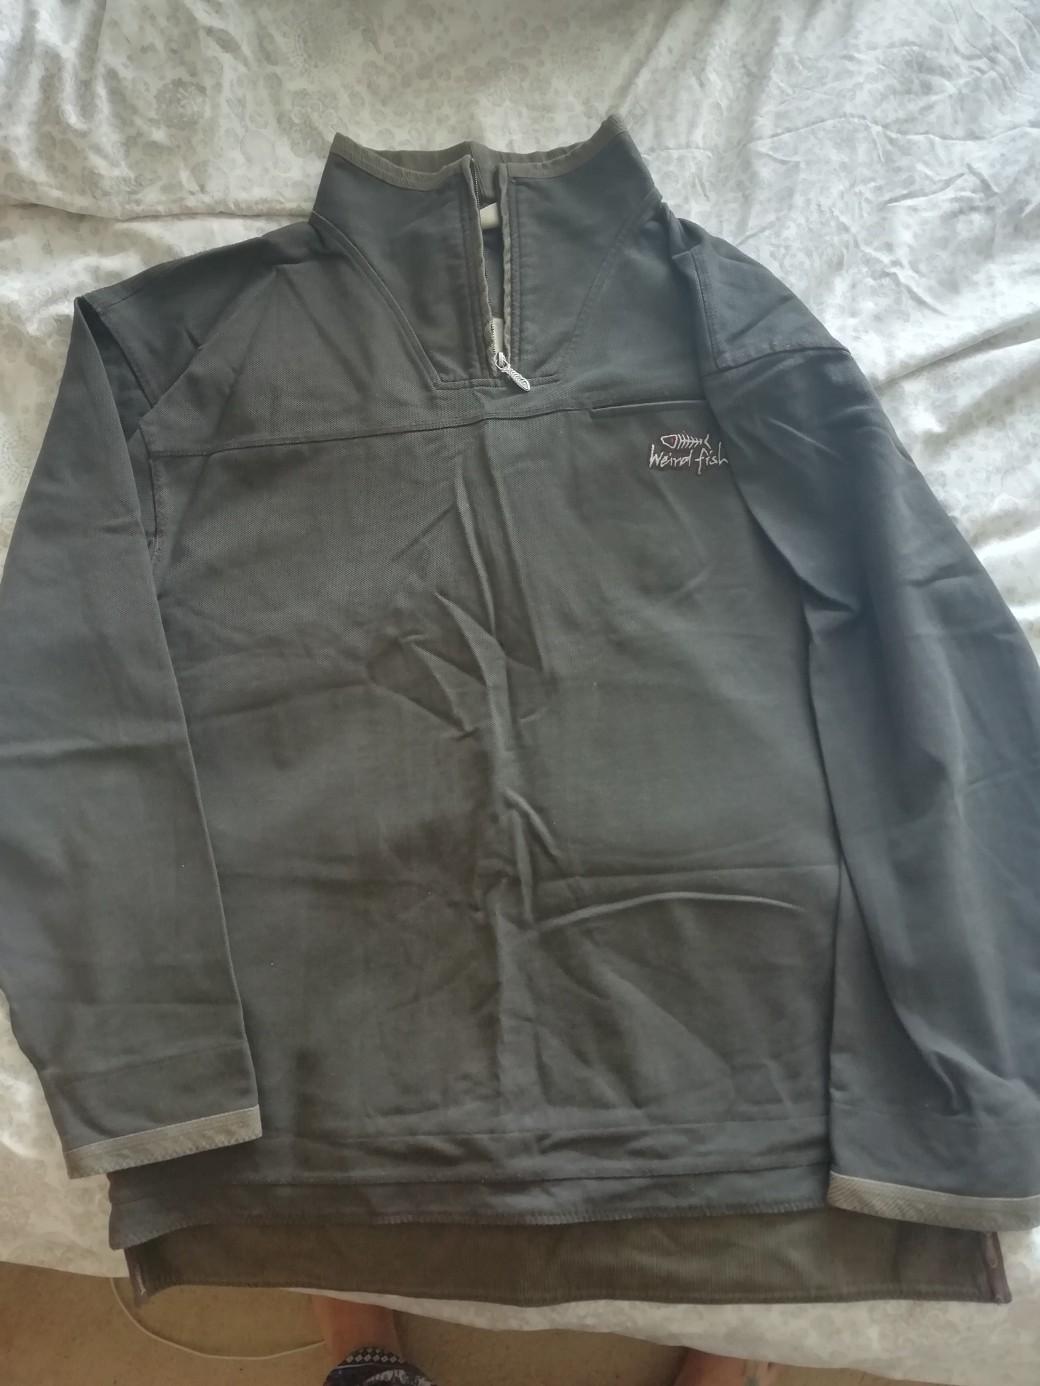 weird fish jacket /top in WS11 Walsall for £5.00 for sale | Shpock